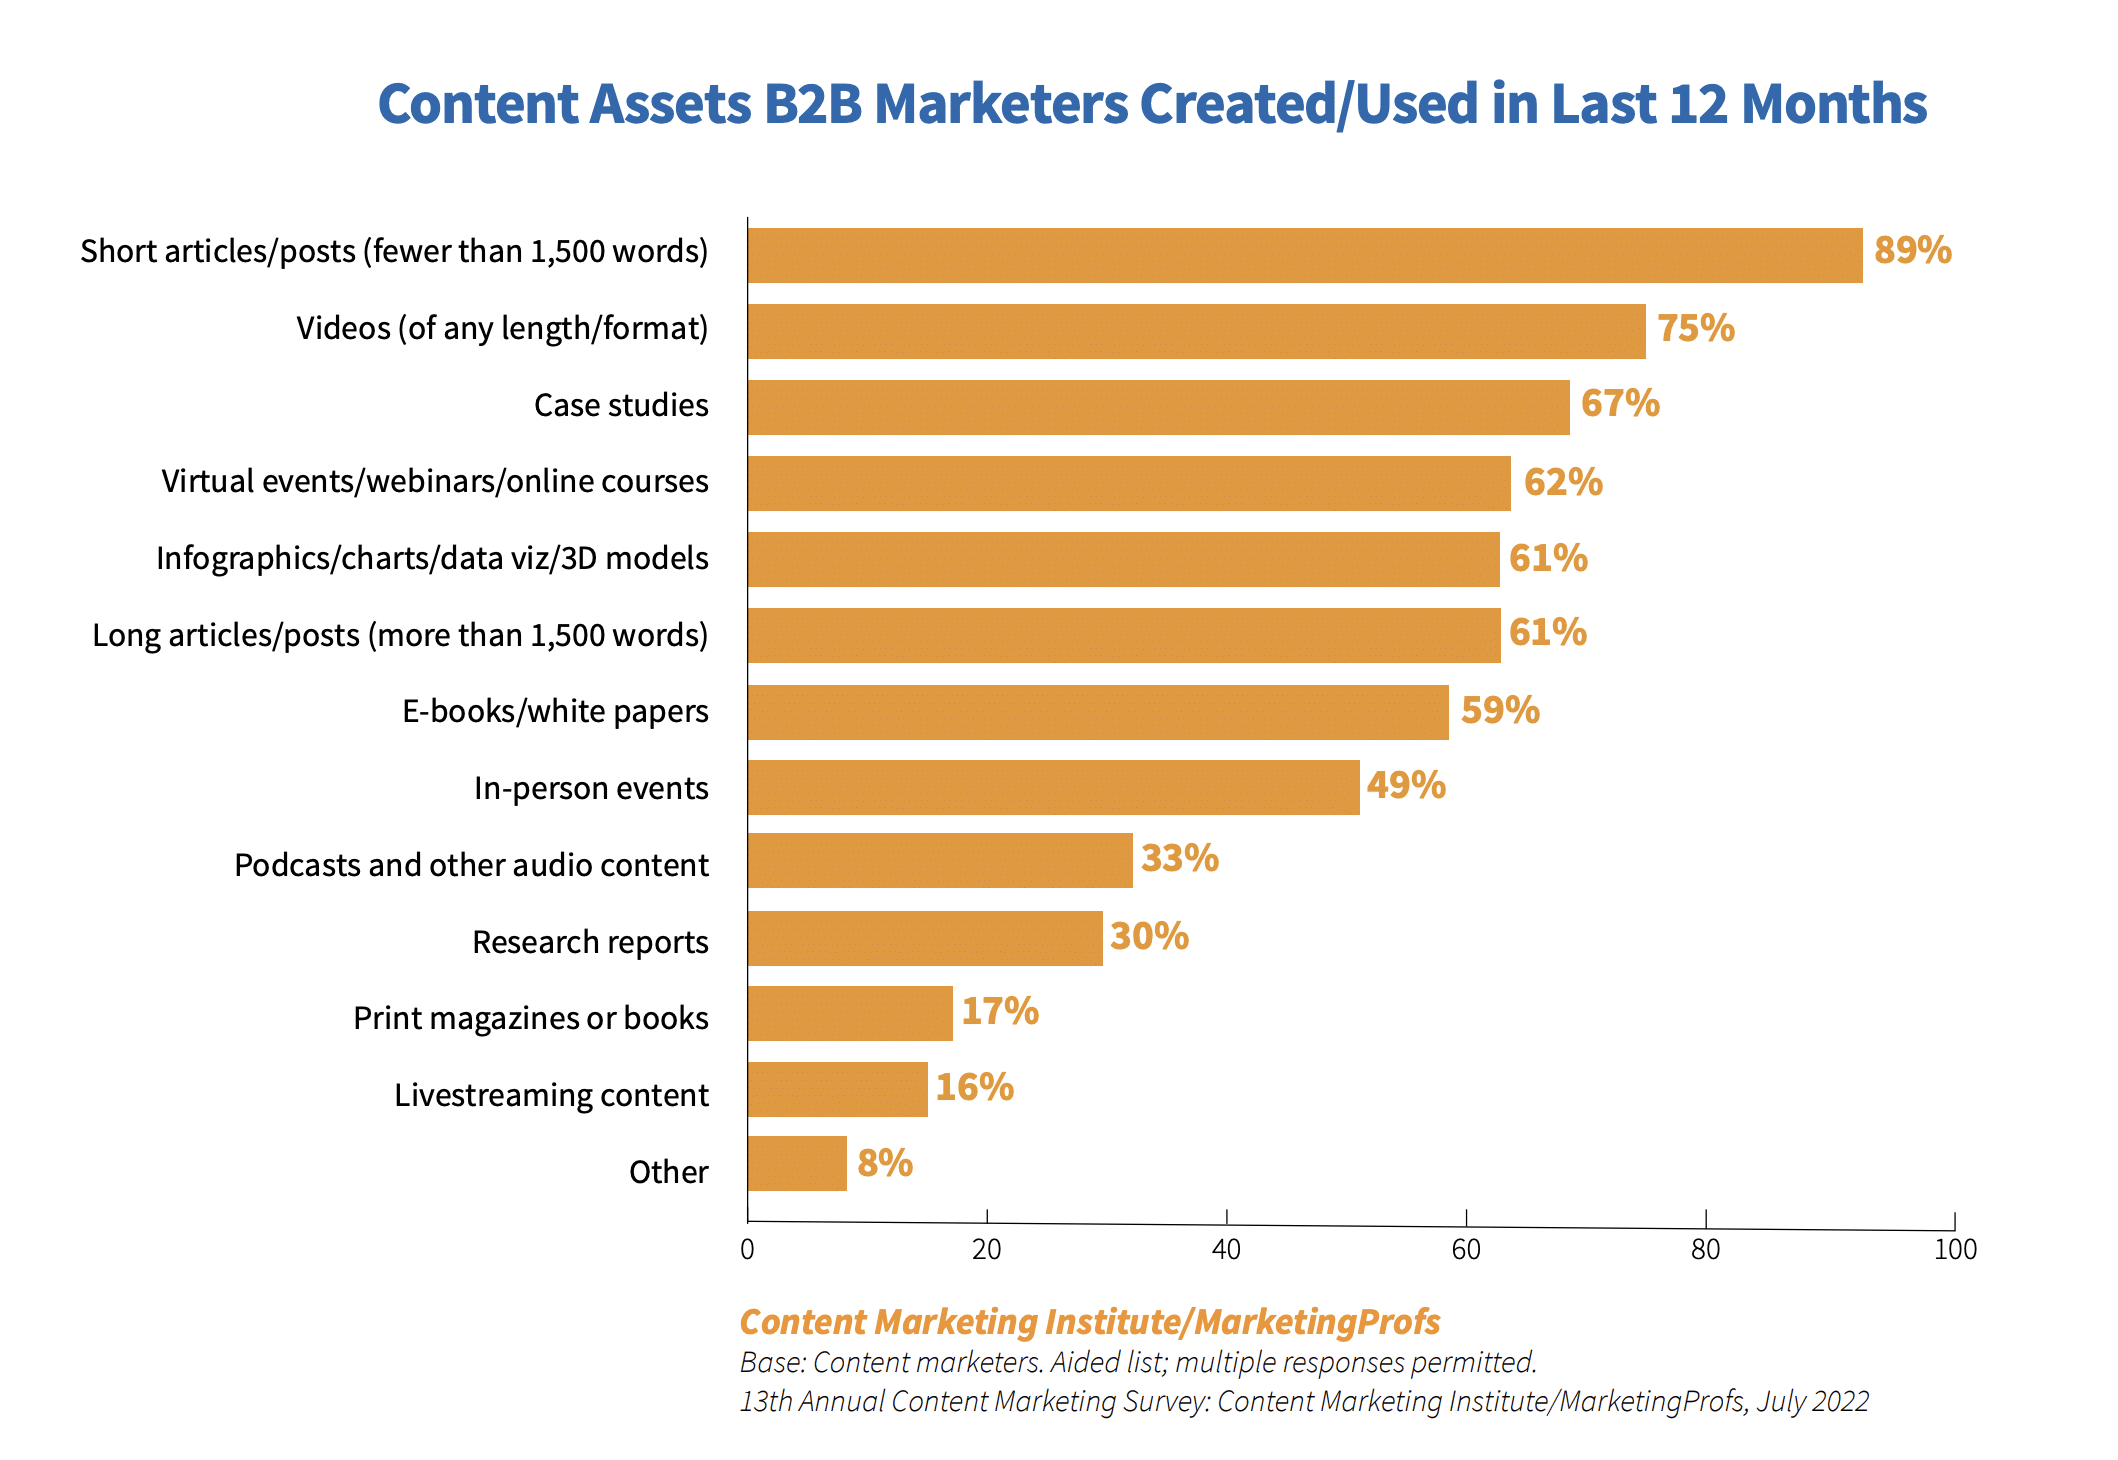 graph shows that 75% of B2B marketers report that they’ve created and used video content in the last 12 months